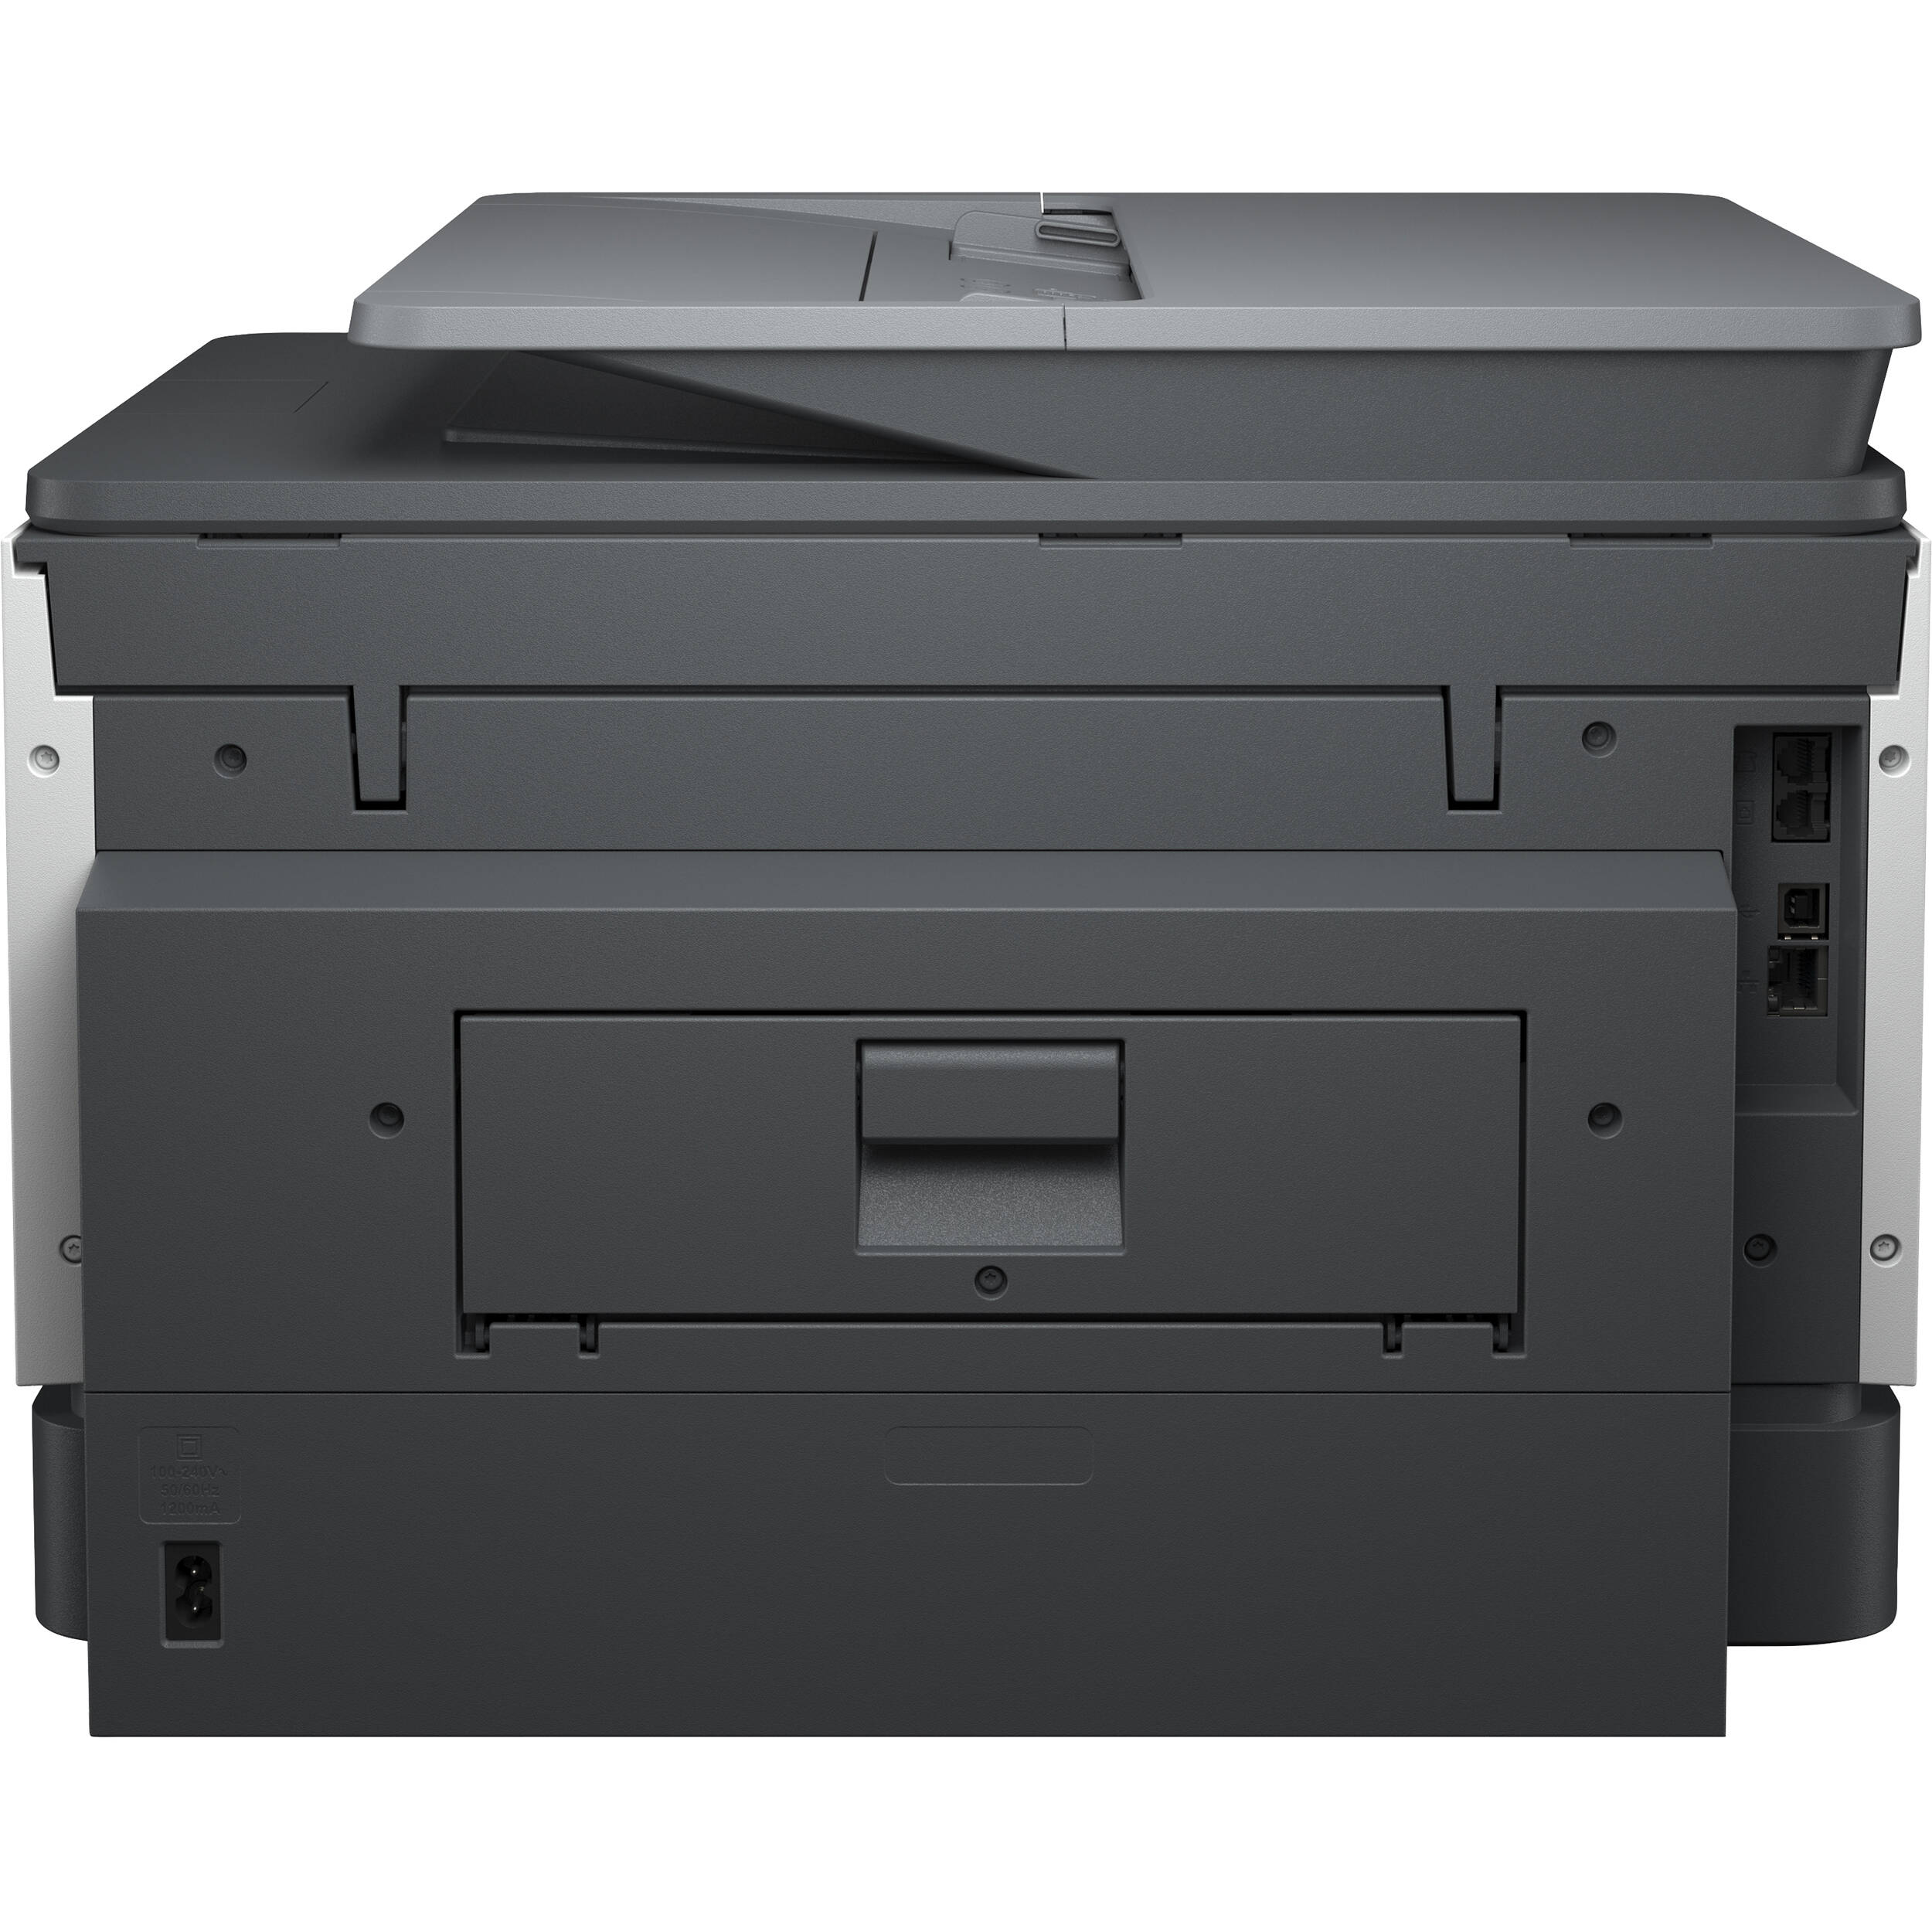 HP HP-OJPRO9025E-RB OfficeJet Pro 9025e Wireless Color All-in-One Printer - Certified Refurbished